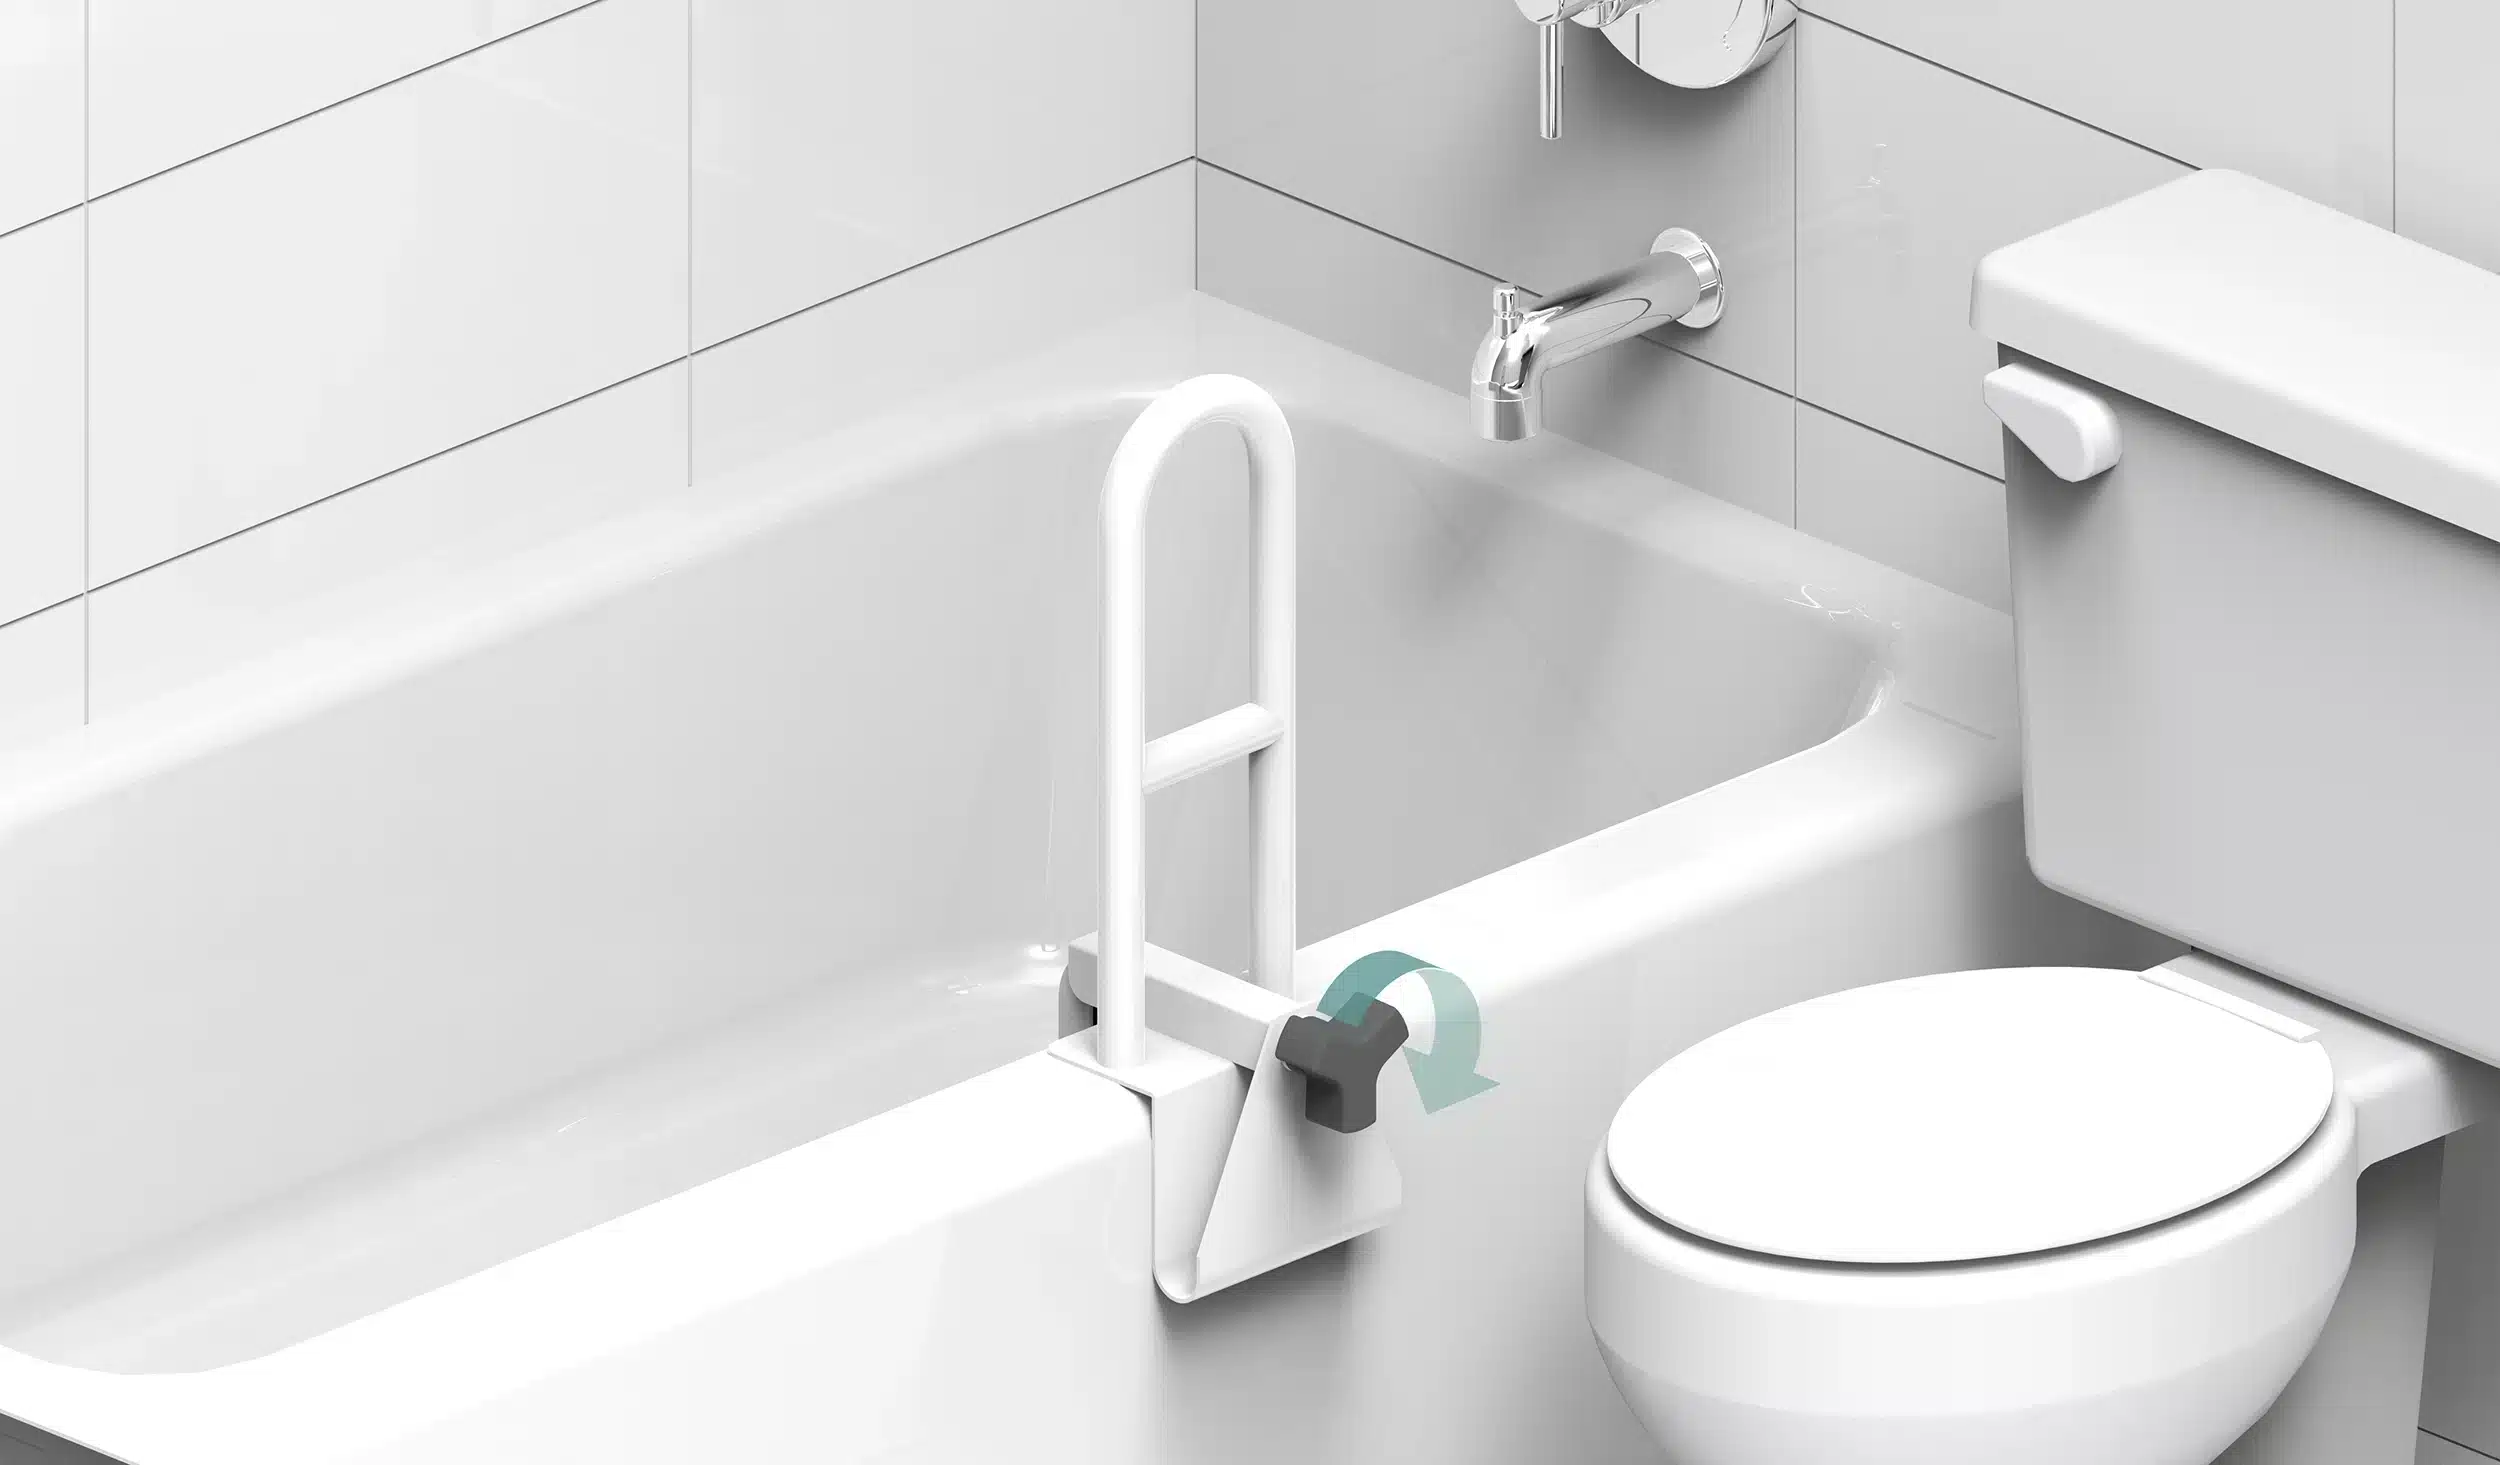 The Easy Mount Tub rail installs on the entry wall of a bathtub. It is secured by a turning a clamp.